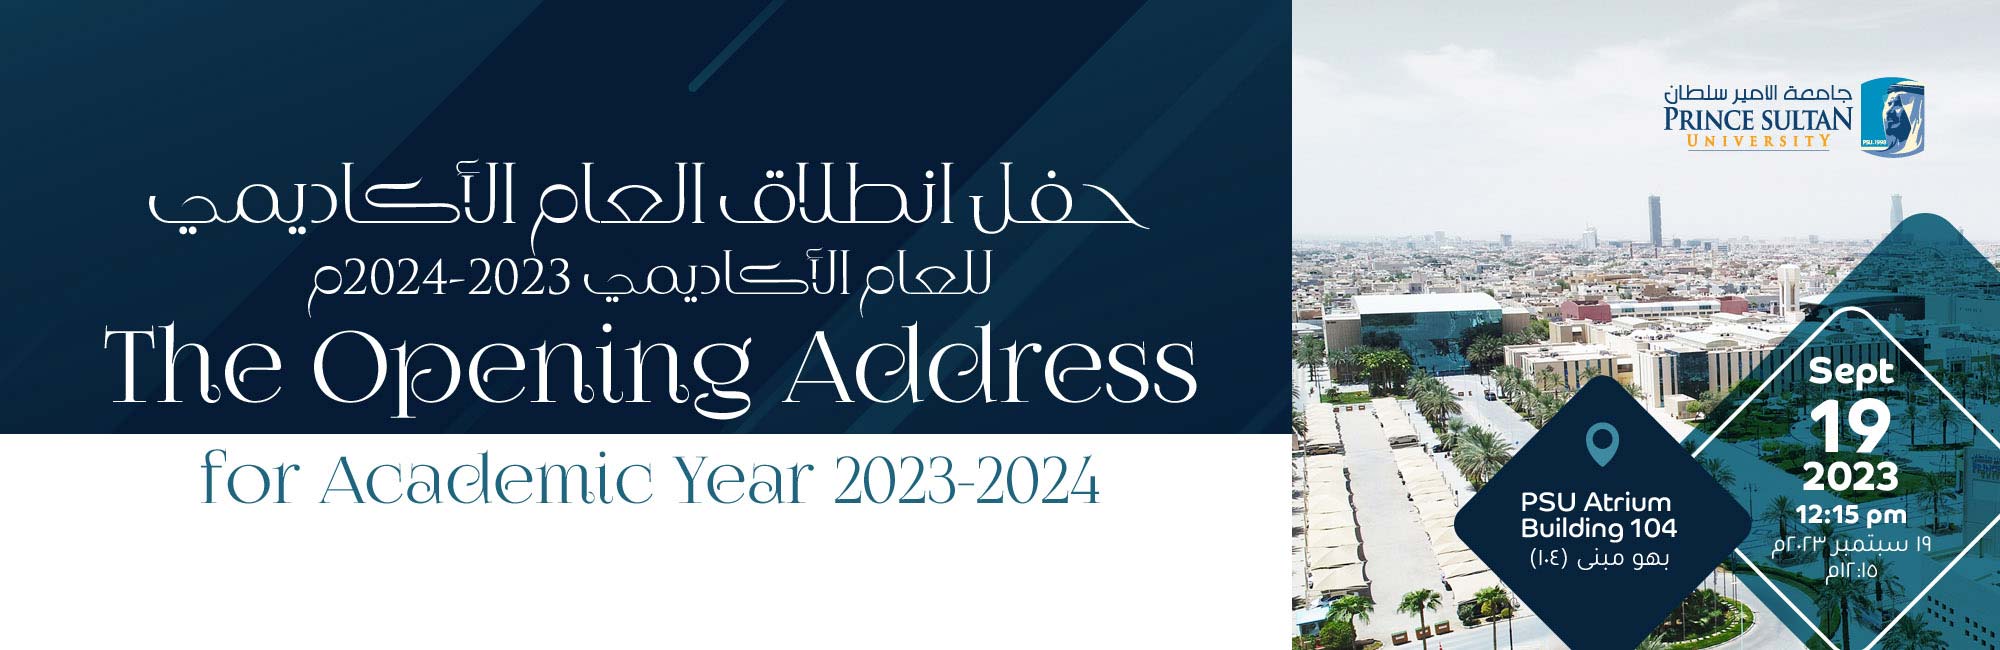 The Opening Address 2023-2024